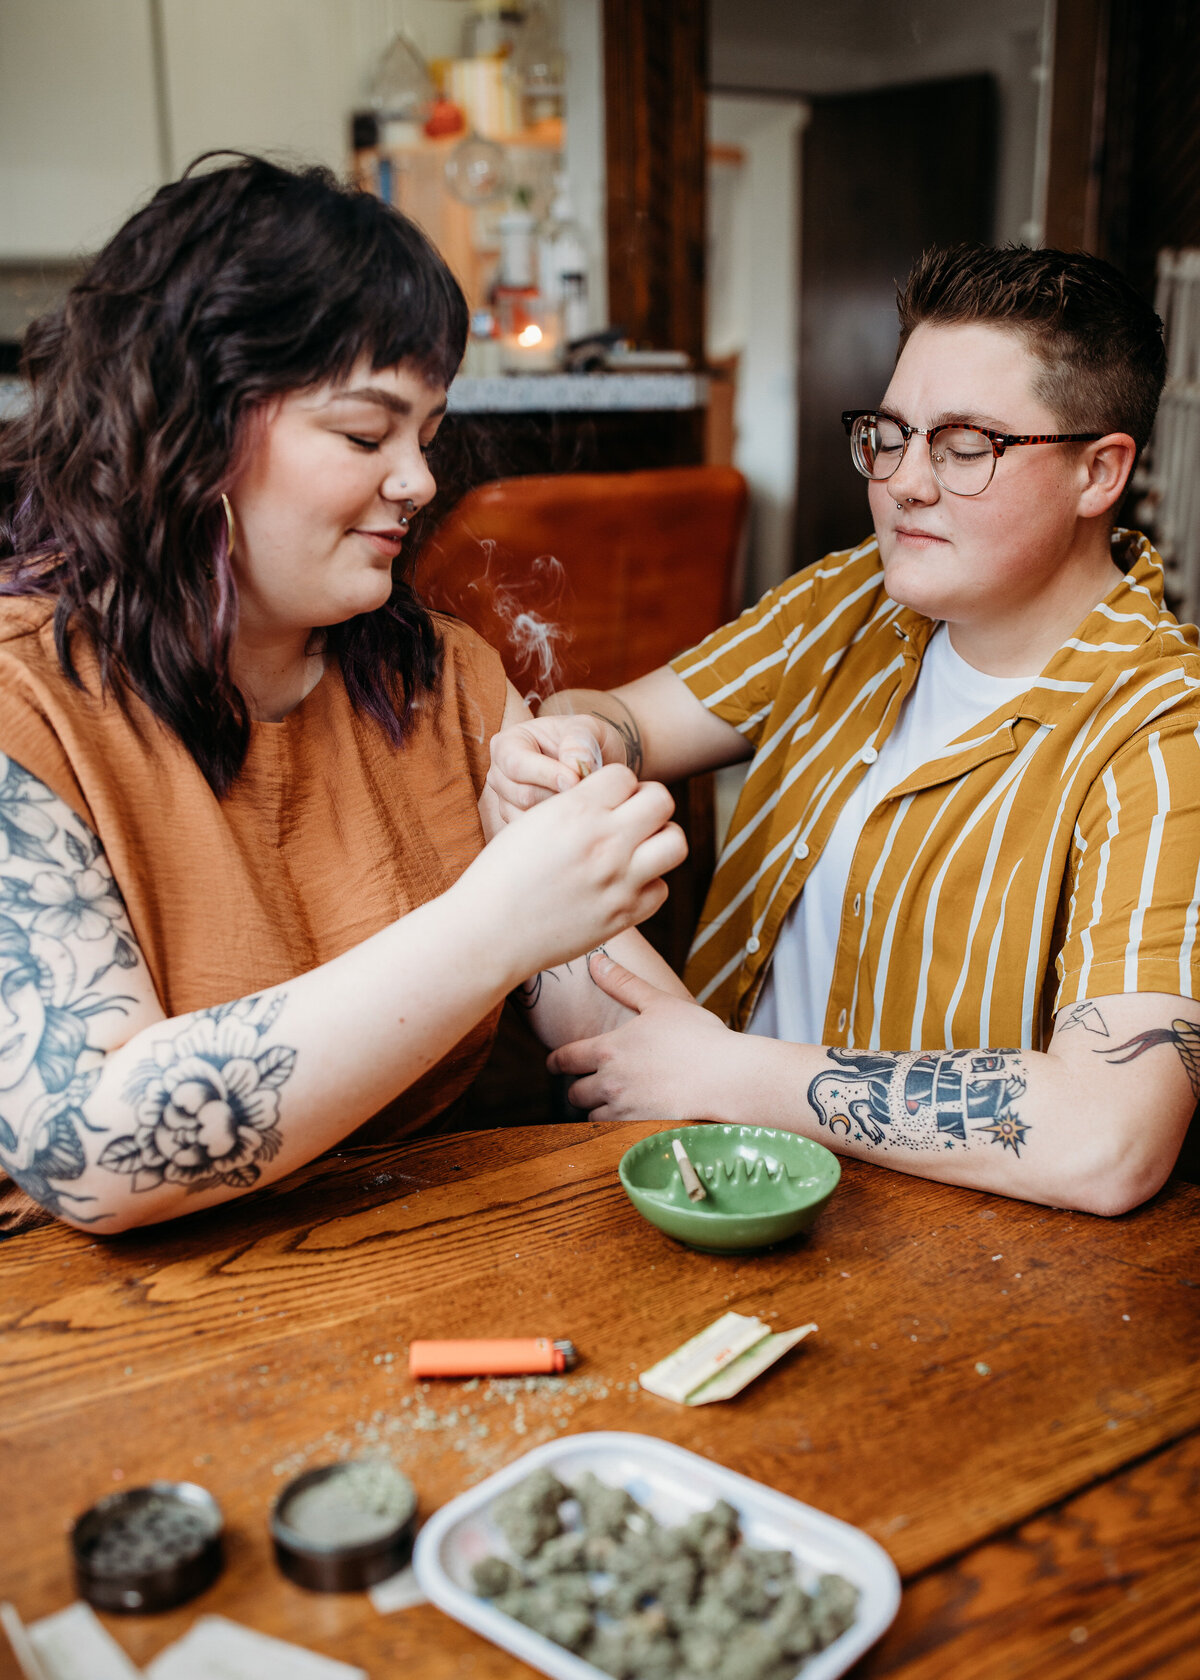 A couple at a wooden table rolling a joint.